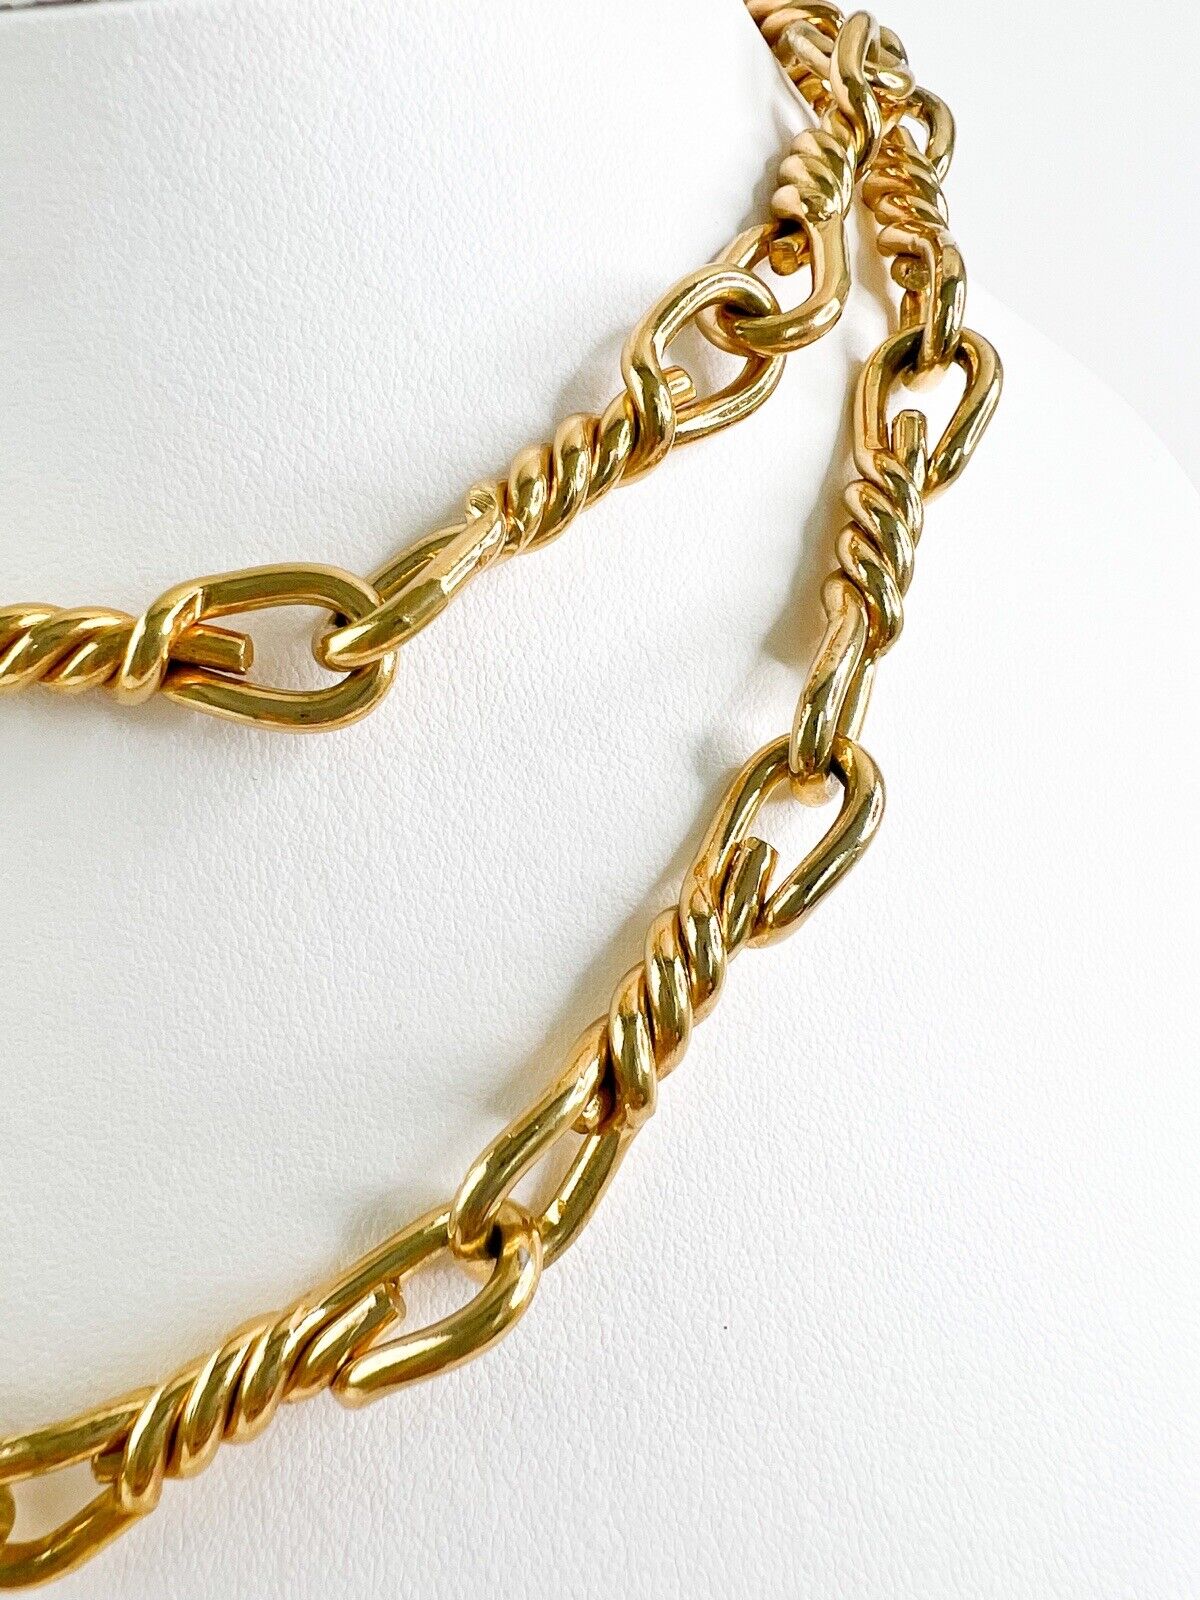 Vintage Christian Dior Necklace, Chain Necklace Gold, Dior Germany 1973, Dior necklace, vintage Dior, Unisex necklace, Personalized Gifts